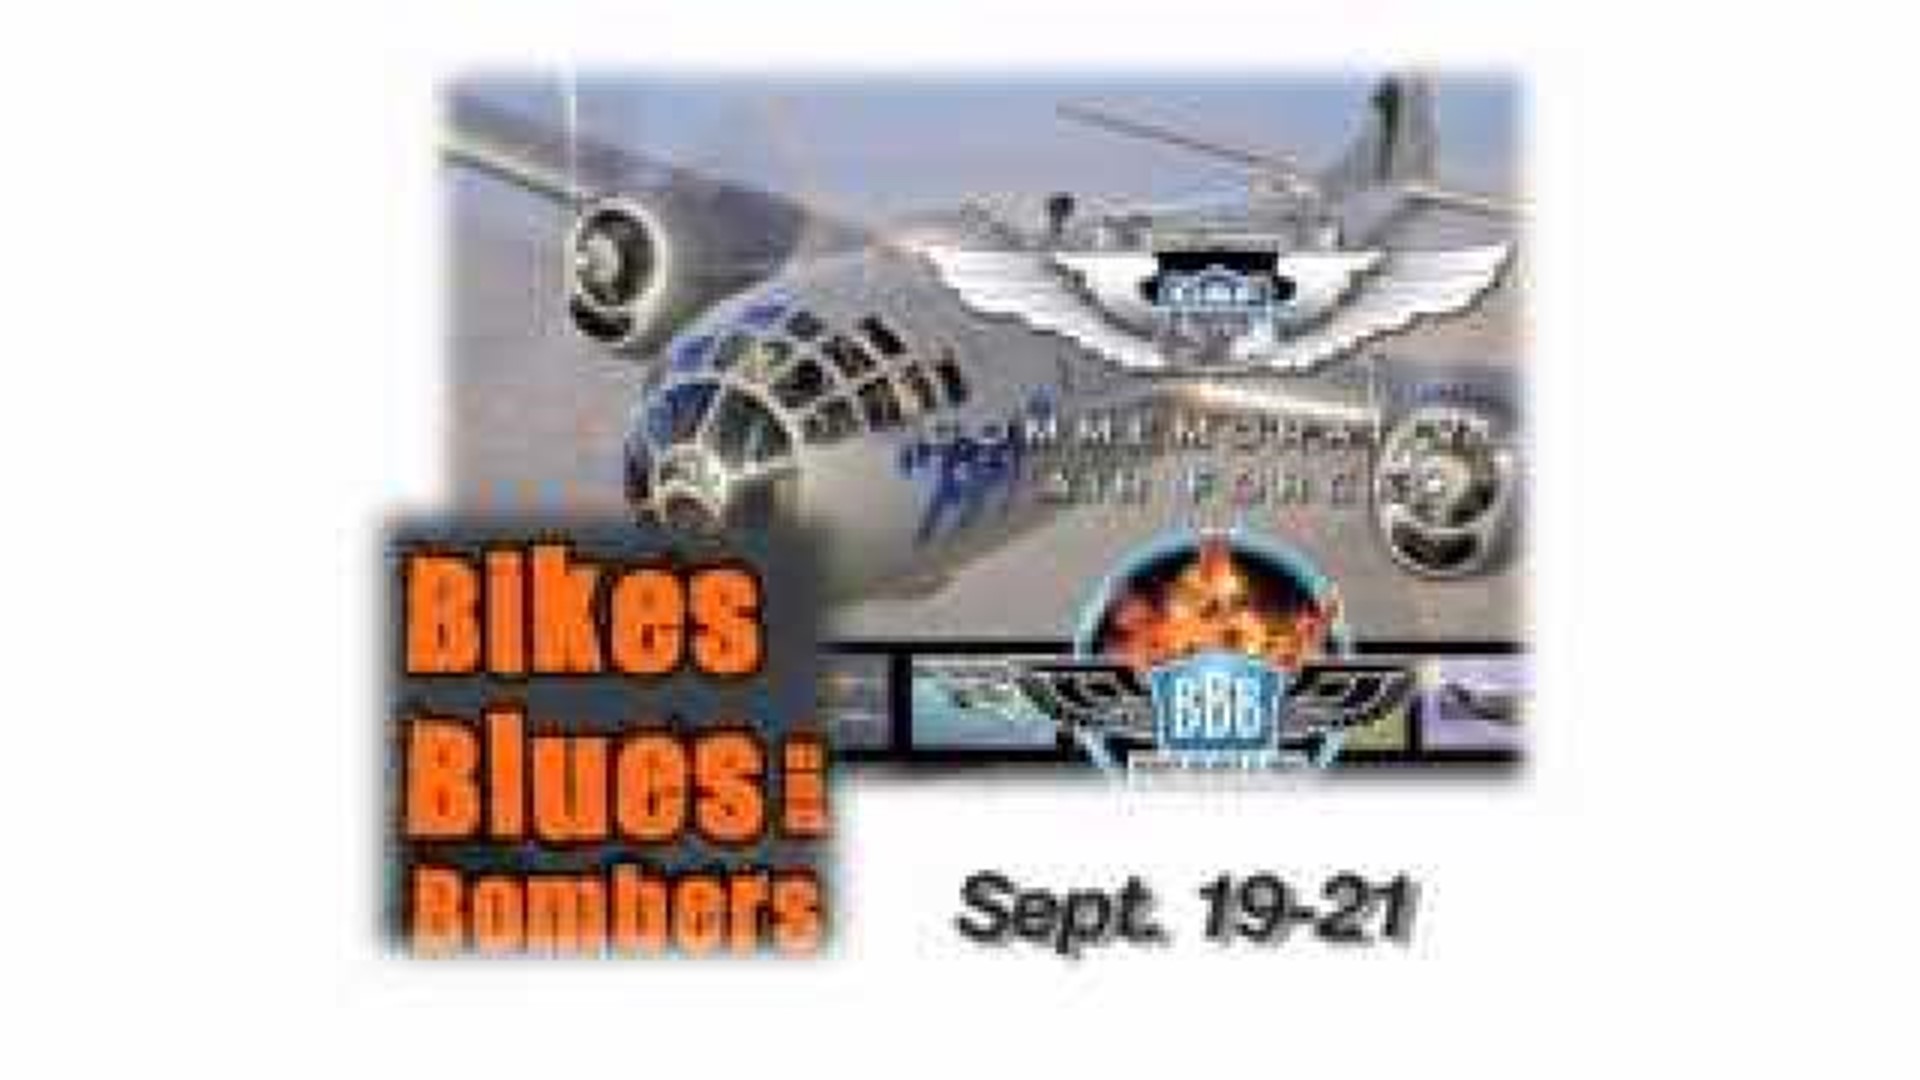 New Events Added to Bikes, Blues and BBQ